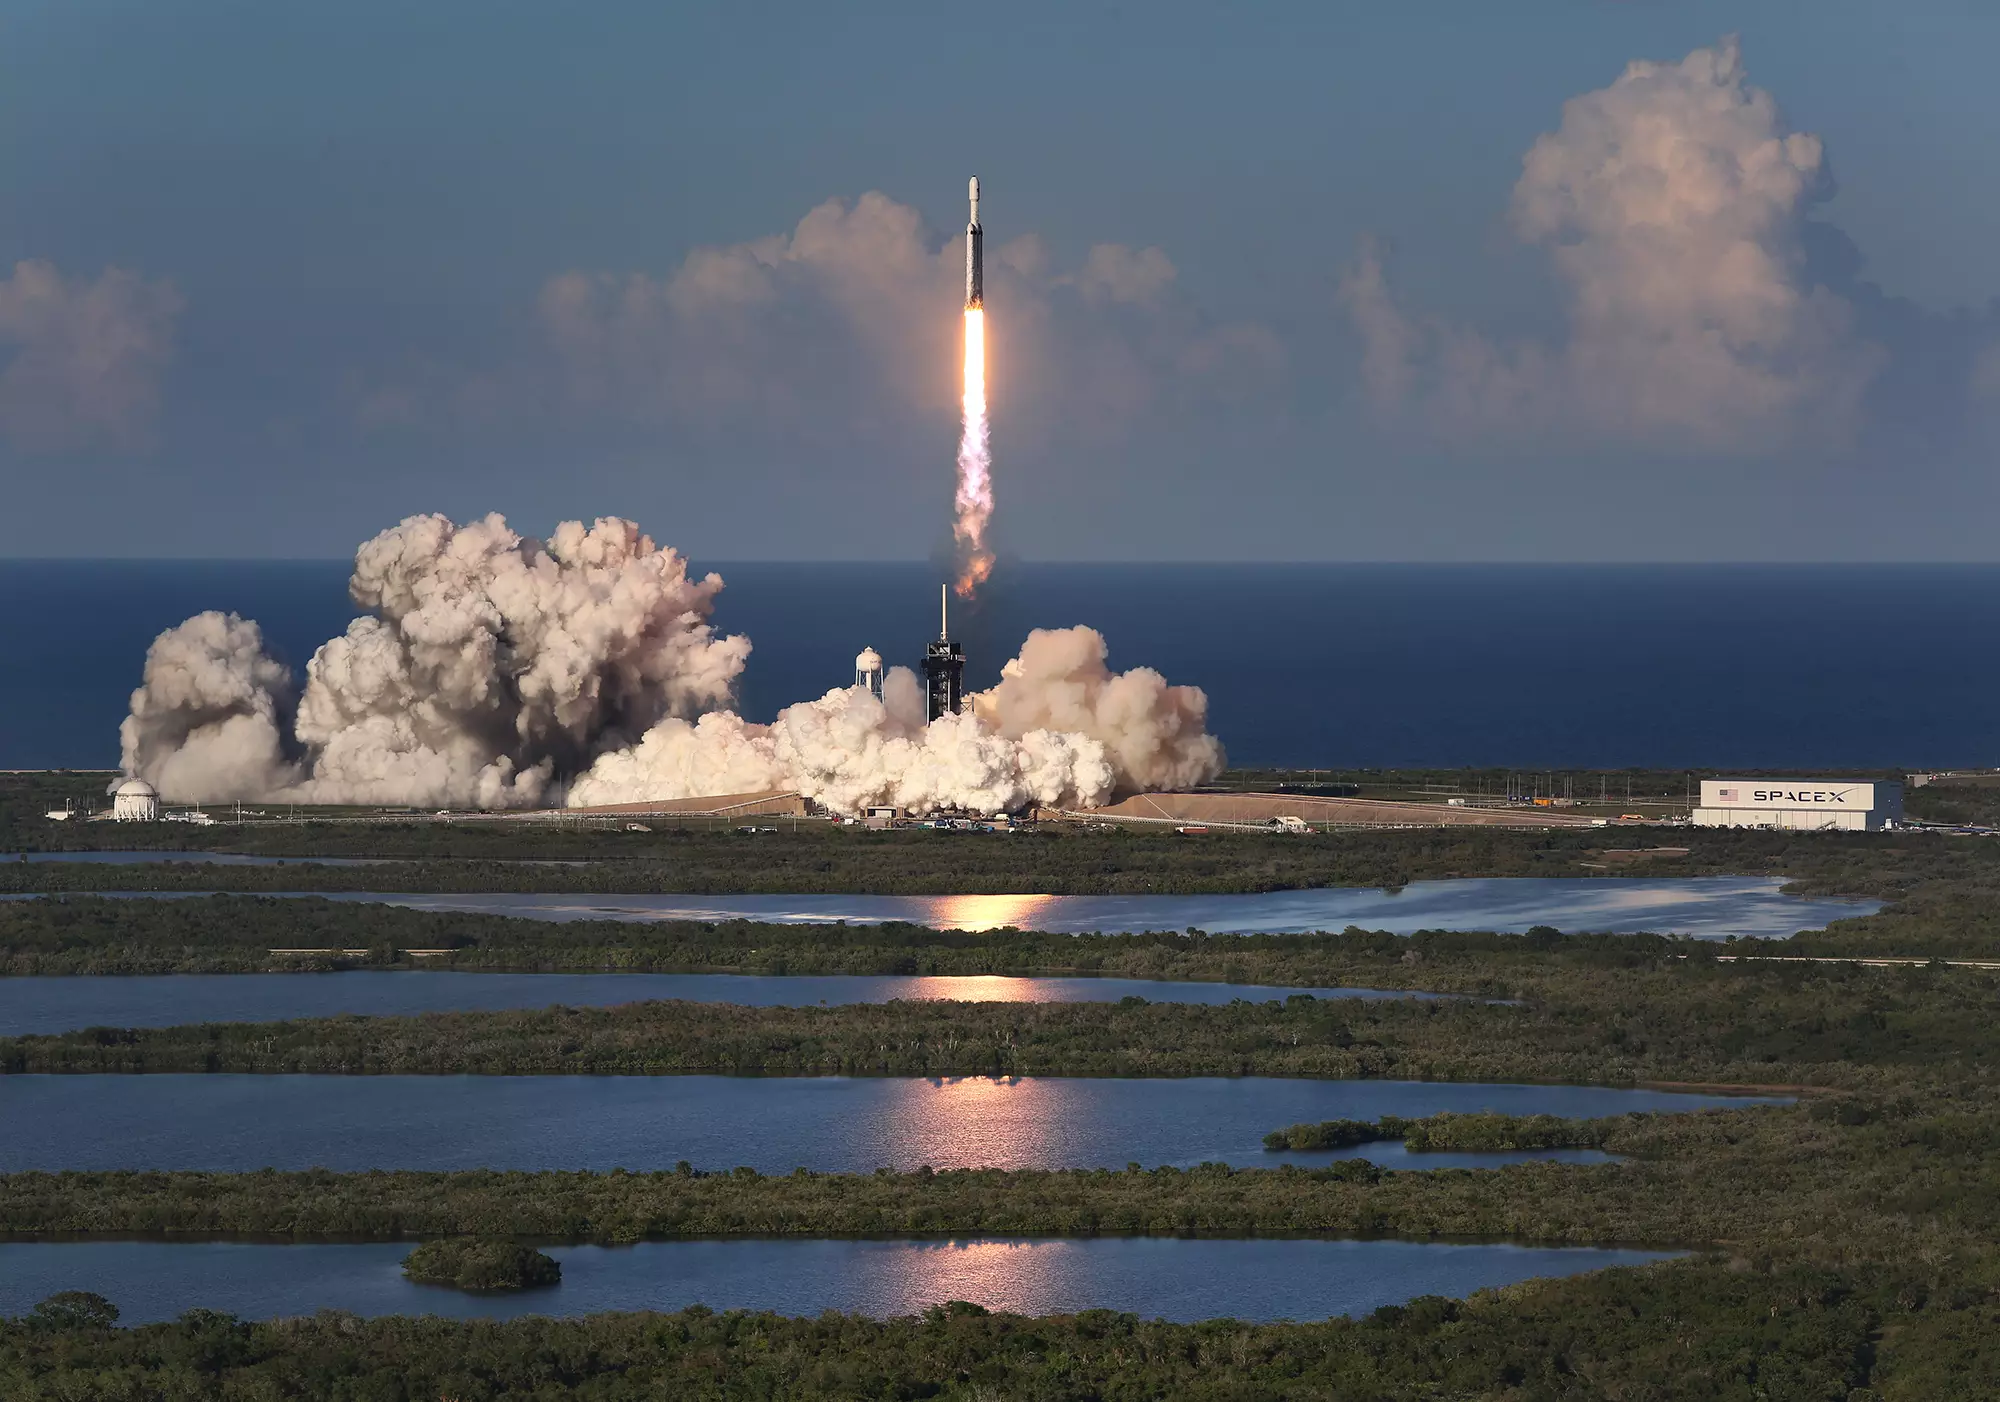 SpaceX tests one of their Falcon 9 rockets.